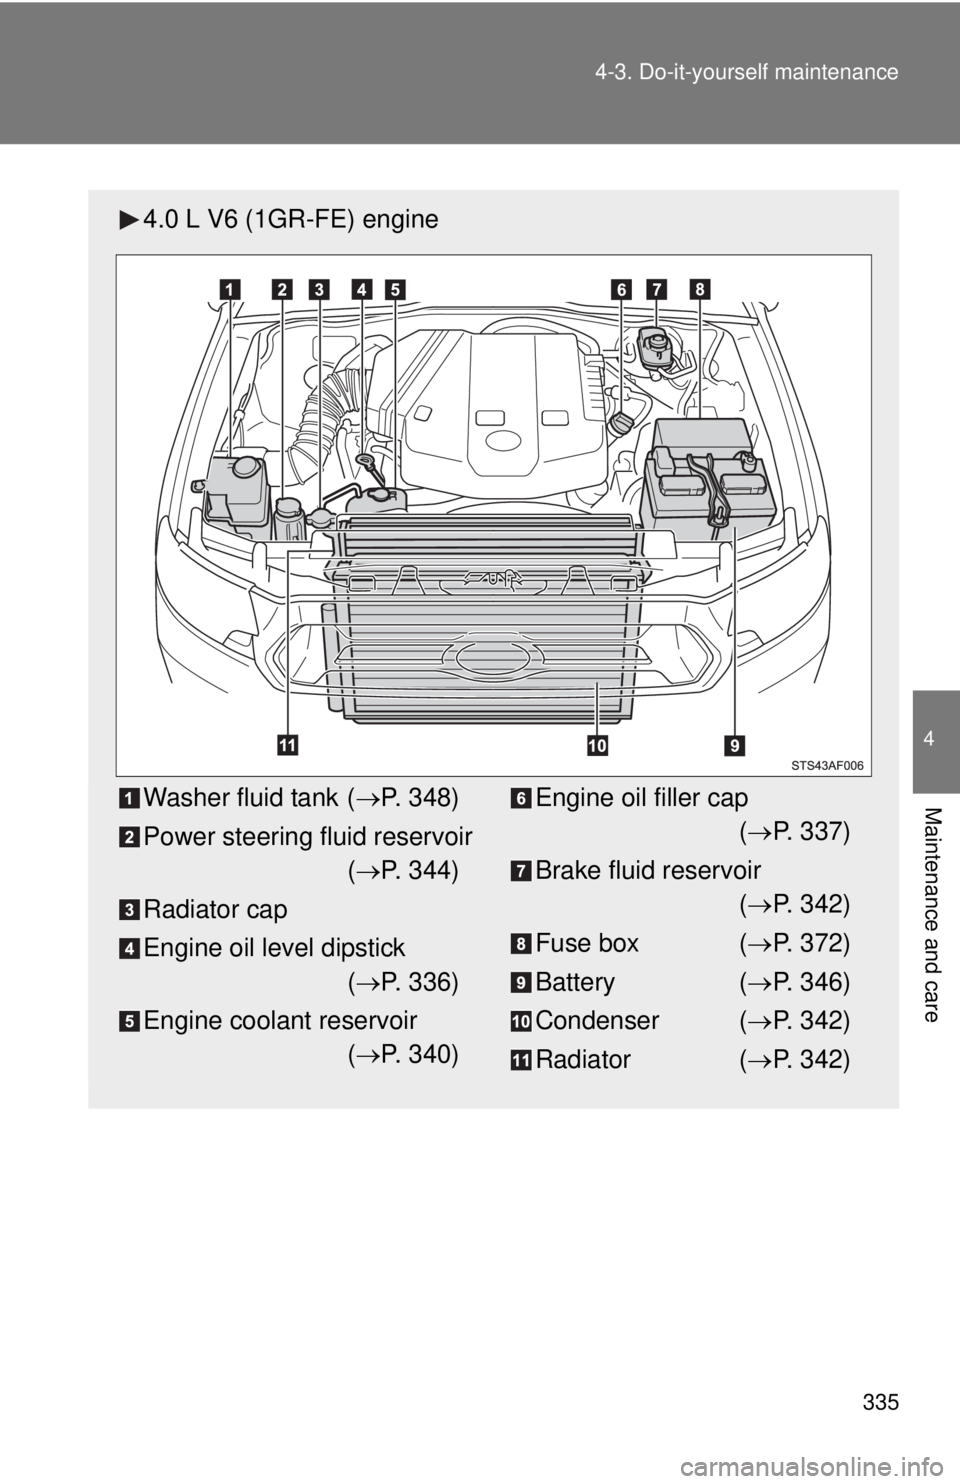 TOYOTA TACOMA 2013  Owners Manual (in English) 335
4-3. Do-it-yourself maintenance
4
Maintenance and care
4.0 L V6 (1GR-FE) engine
Washer fluid tank (
P. 348)
Power steering fluid reservoir ( P. 344)
Radiator cap
Engine oil level dipstick (�